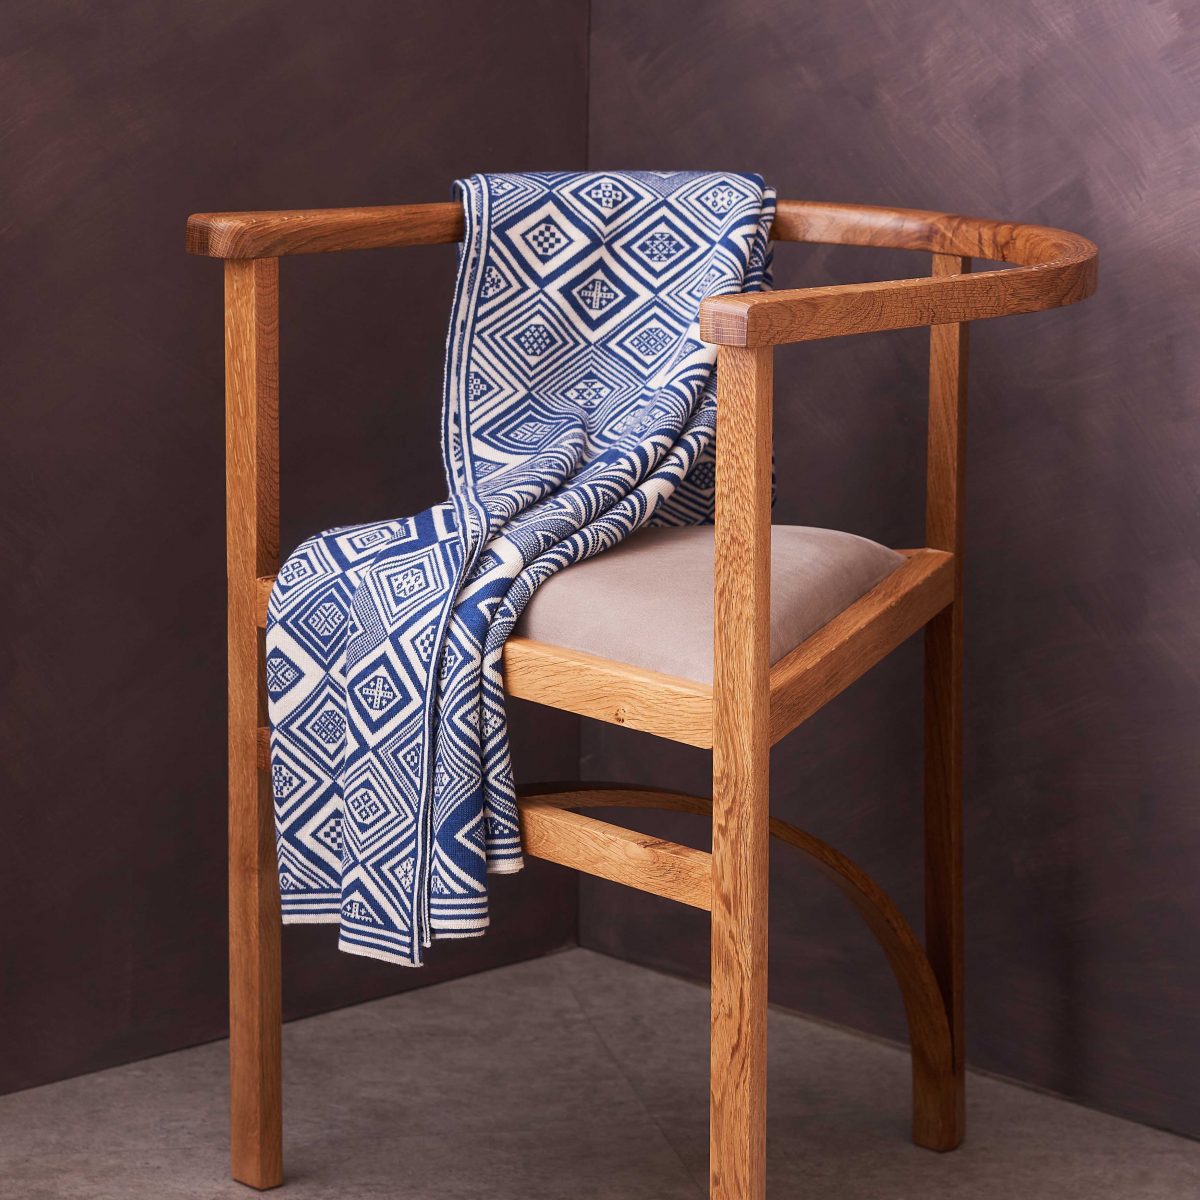  Blue and White throw by BAKKA drapped over prism chair by Angus Ross.